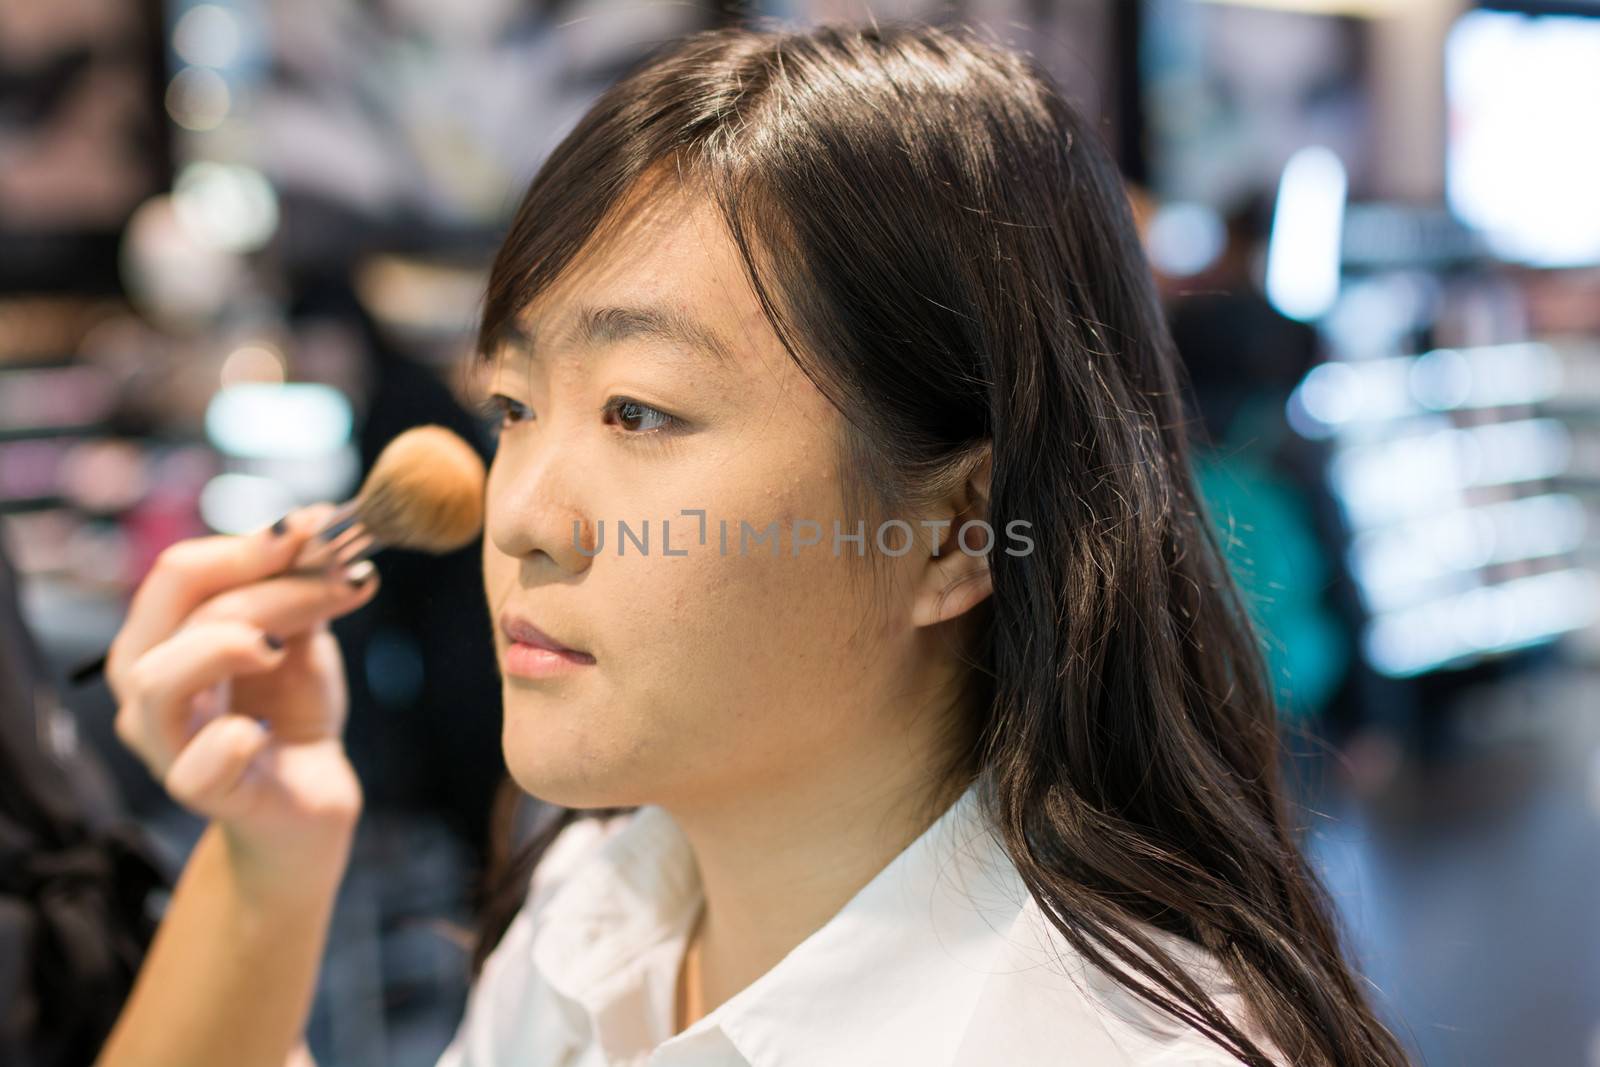 Woman applying cosmetics by IVYPHOTOS